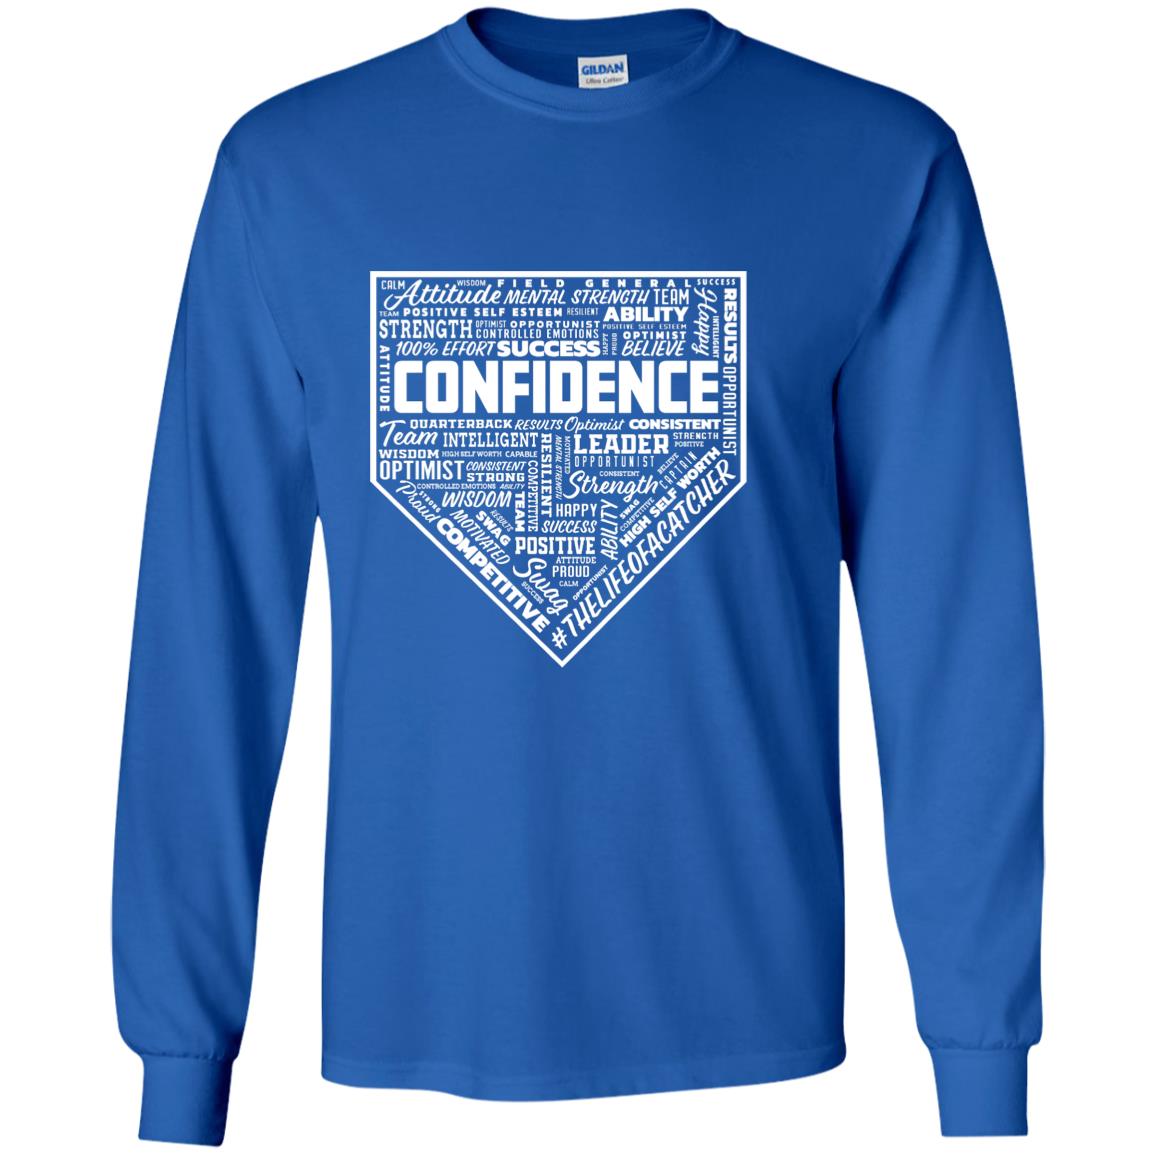 The Catching Guy Catcher Confidence Youth Long Sleeve Tee in blue